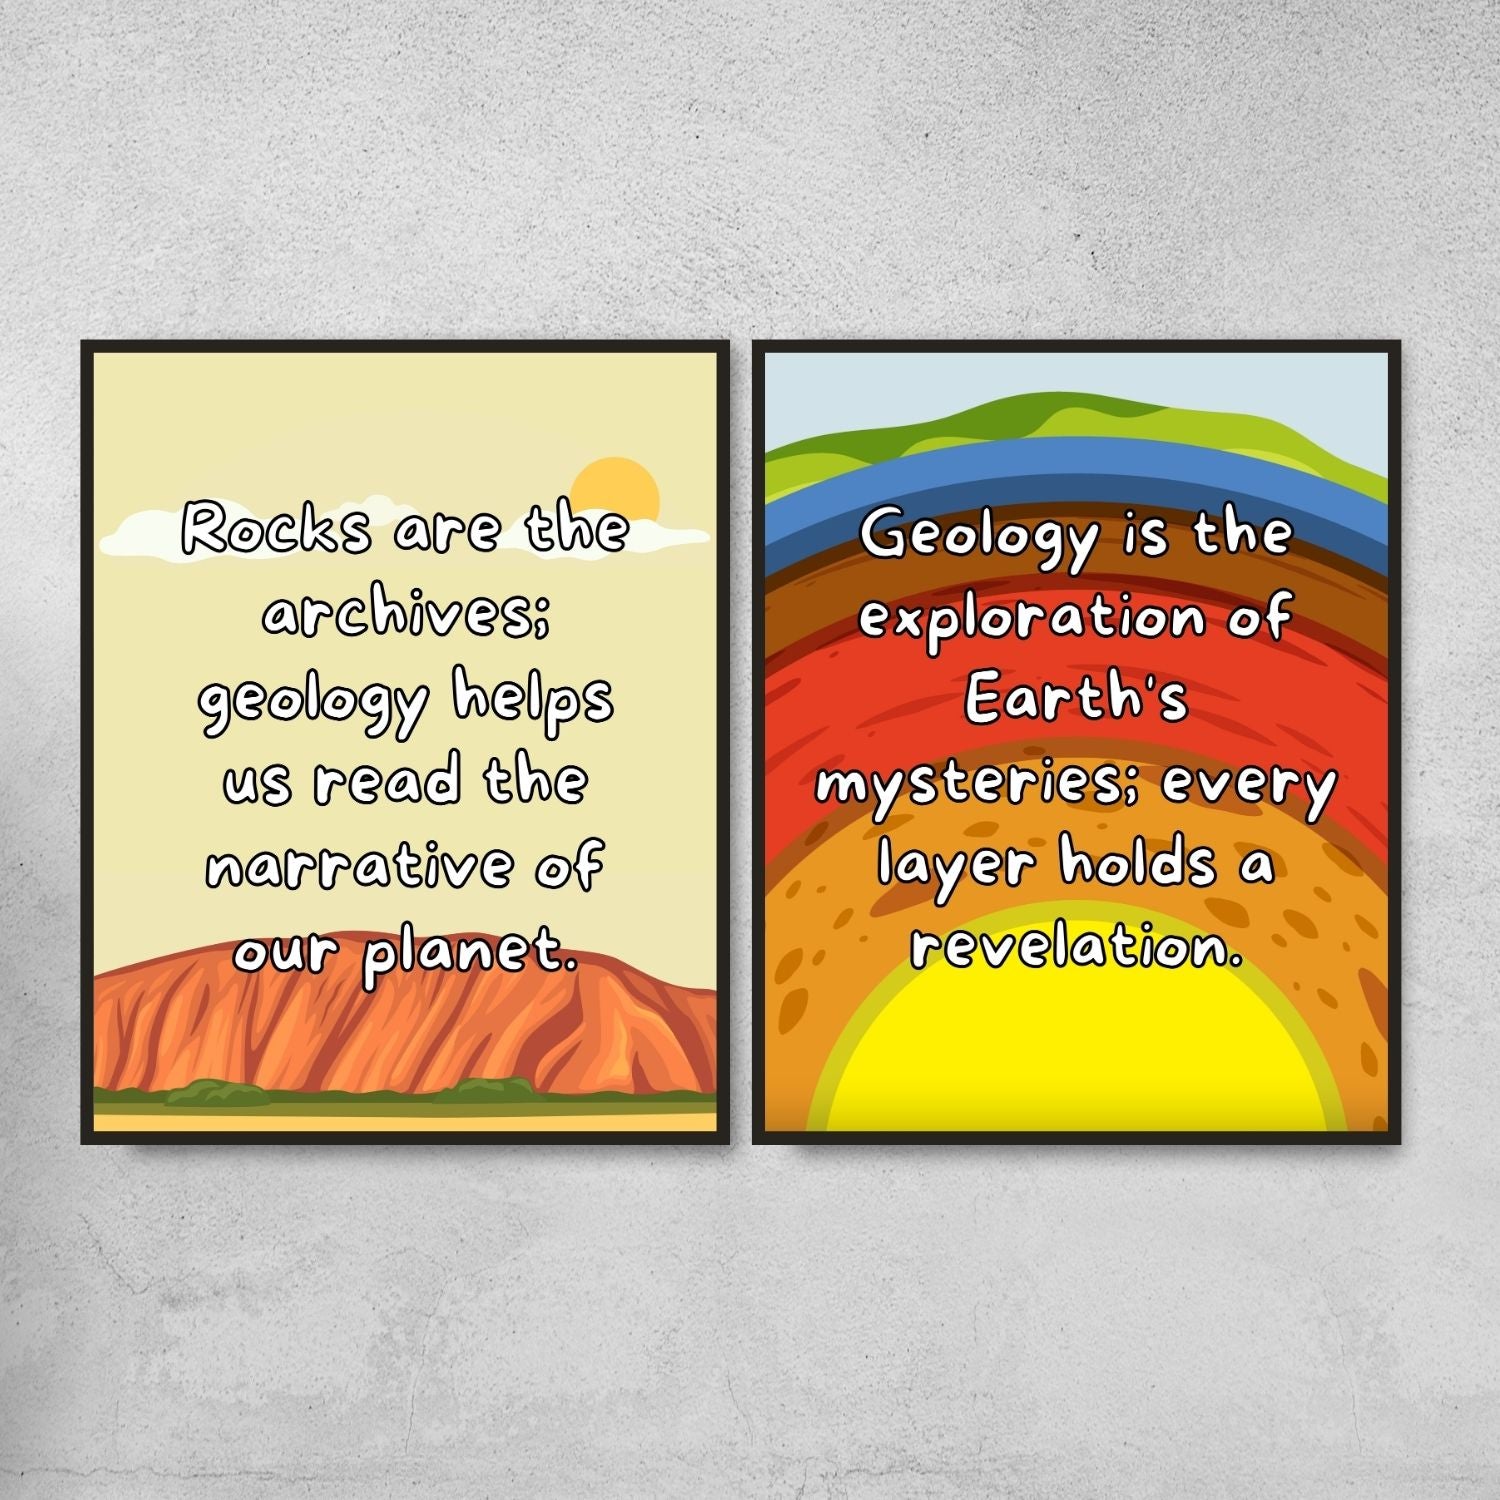 Quotes for Geology classroom decoration - Vol.1